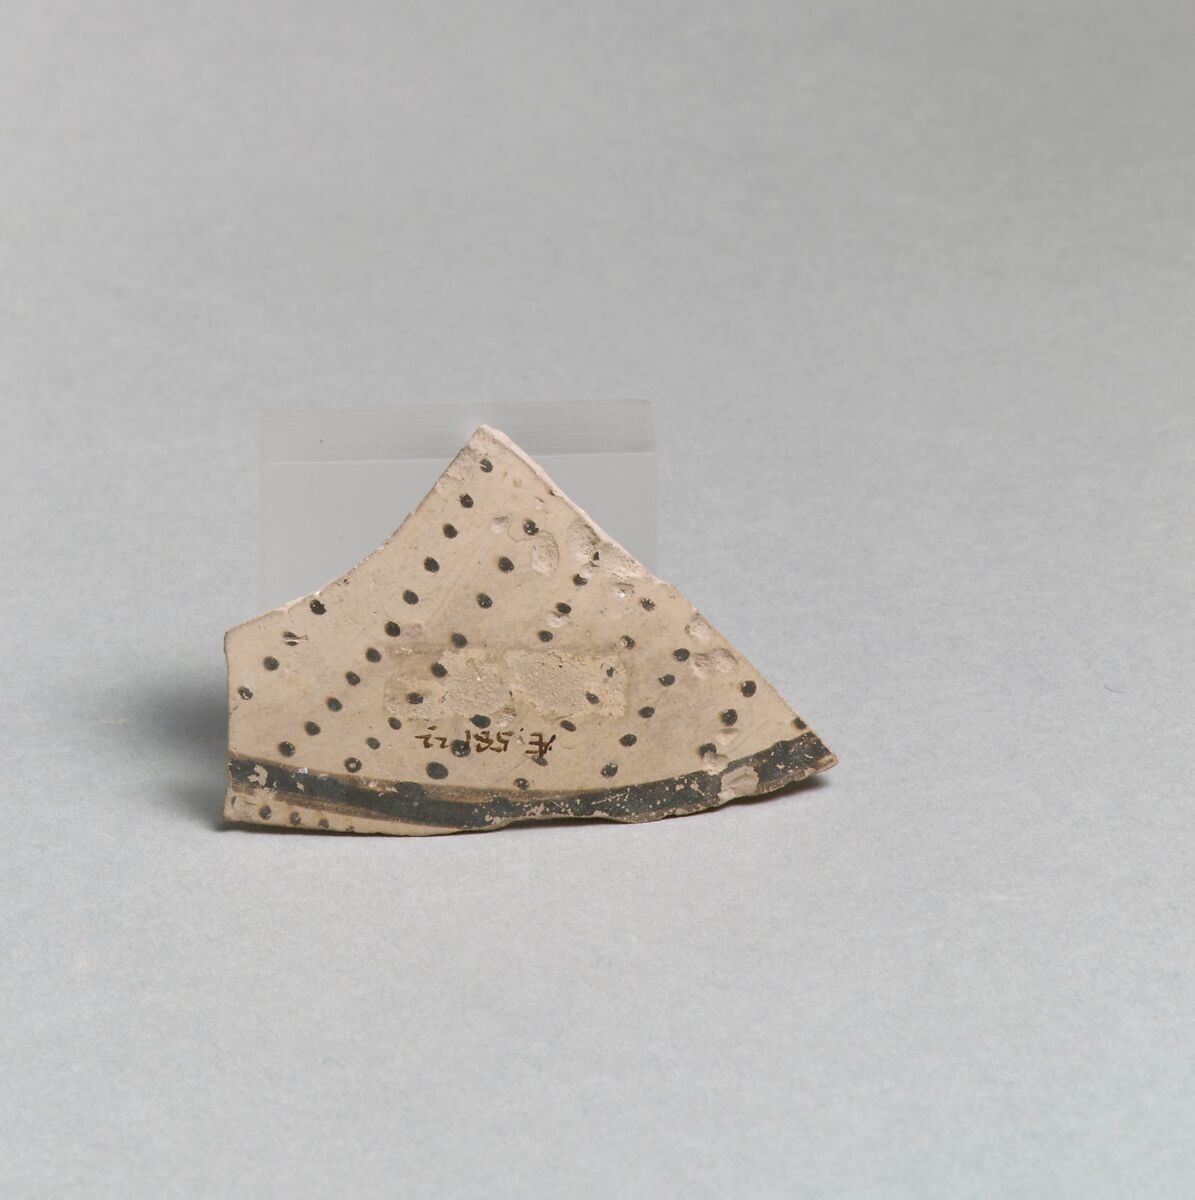 Terracotta vessel fragment with rows of dots and band, Terracotta, Minoan 